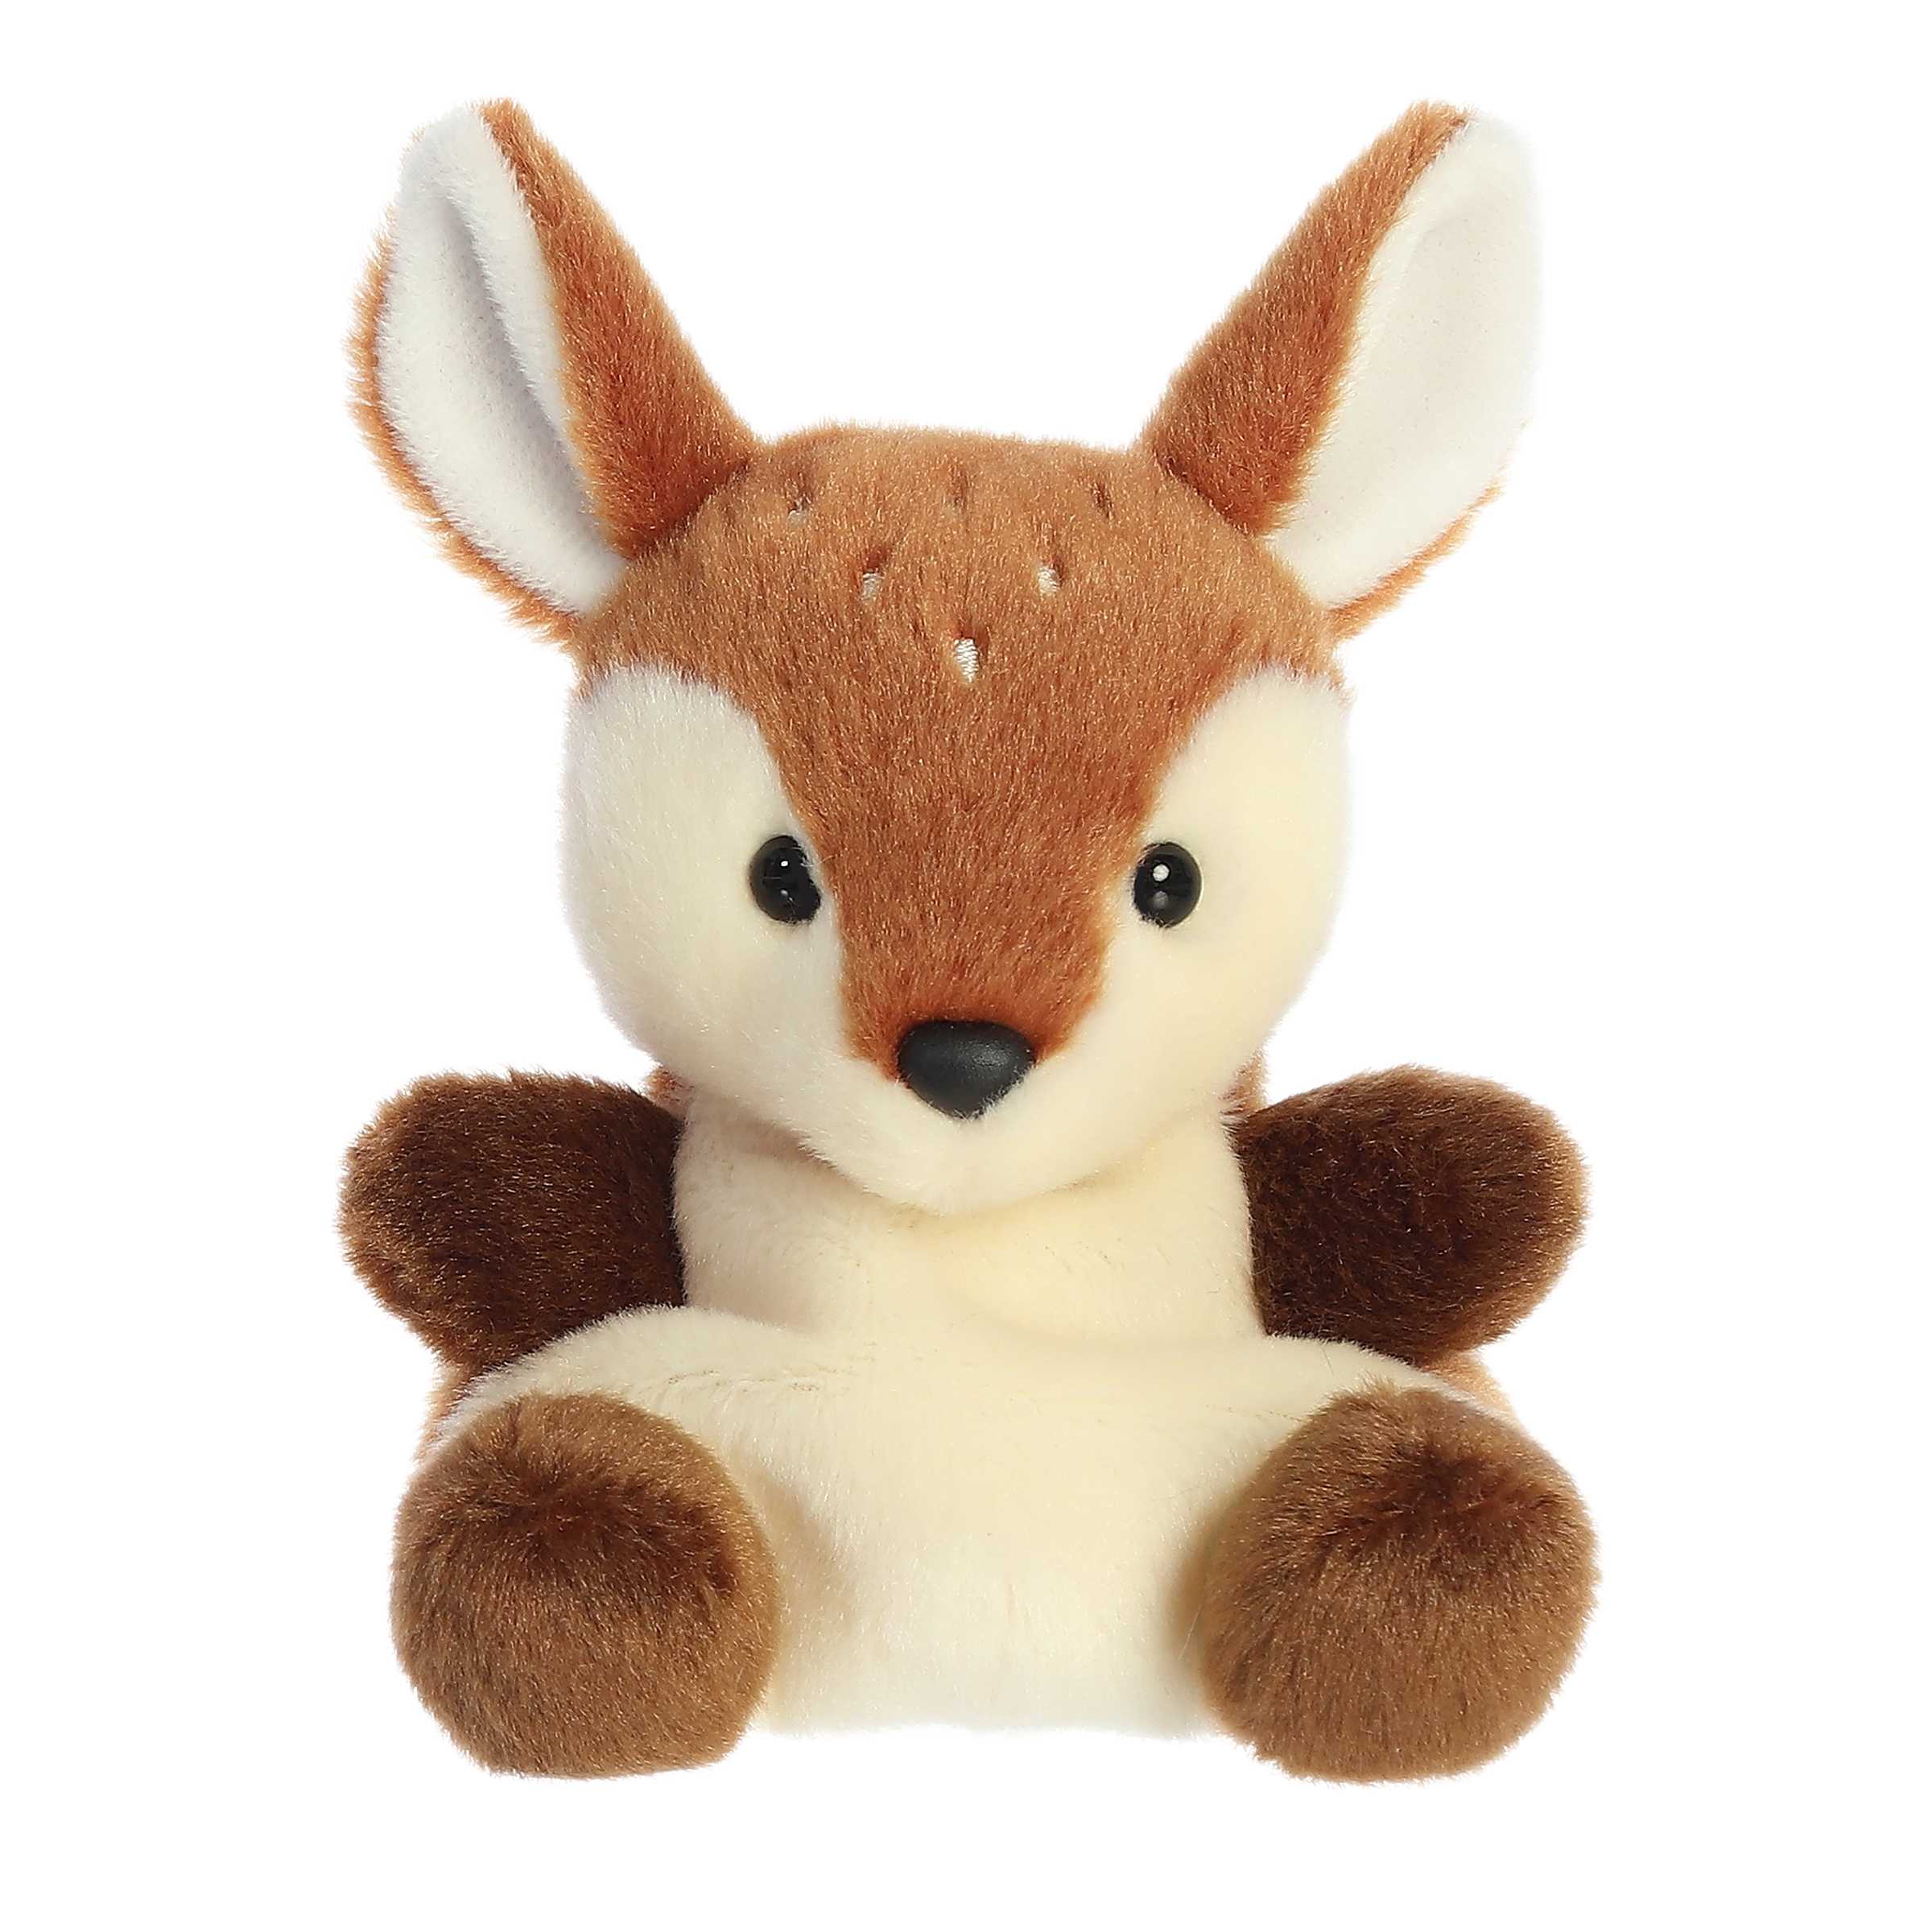 Dalia Fawn is a charming plush with soft, cream-colored fur that contrasts beautifully with her warm, brown spots!